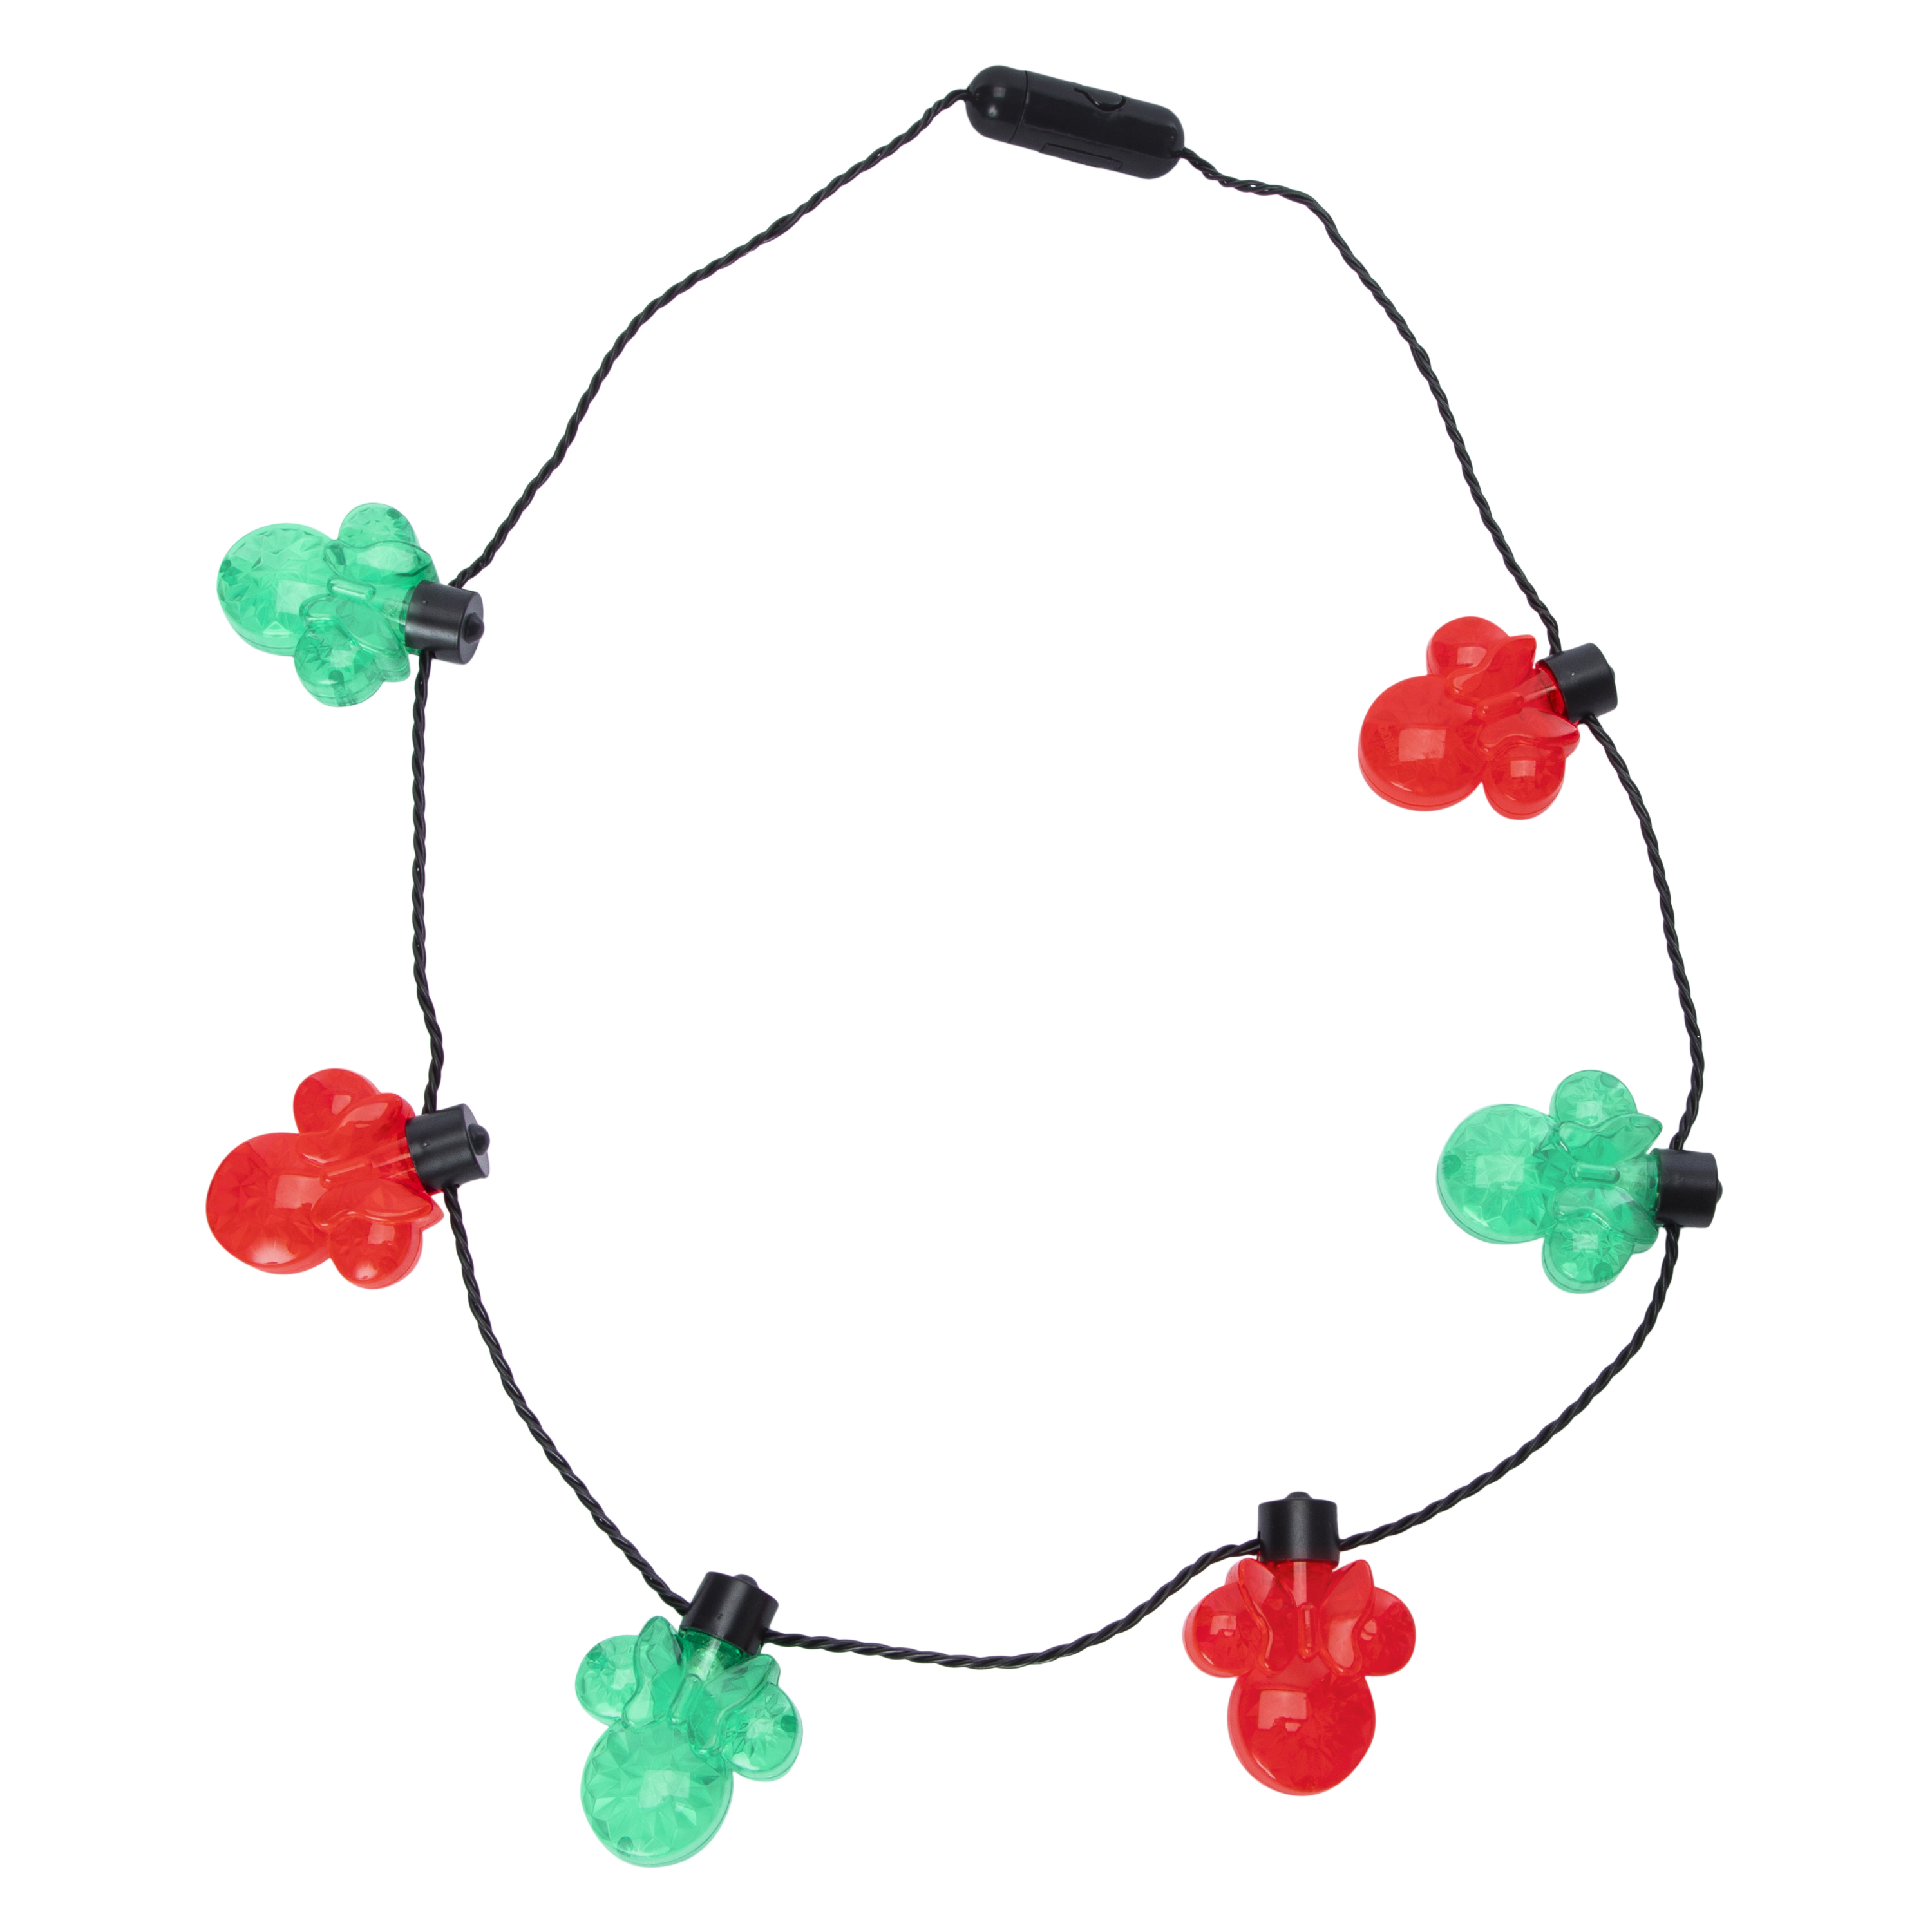 Mickey Mouse Icon Jingle Bell Light-Up Necklace was released today – Dis  Merchandise News